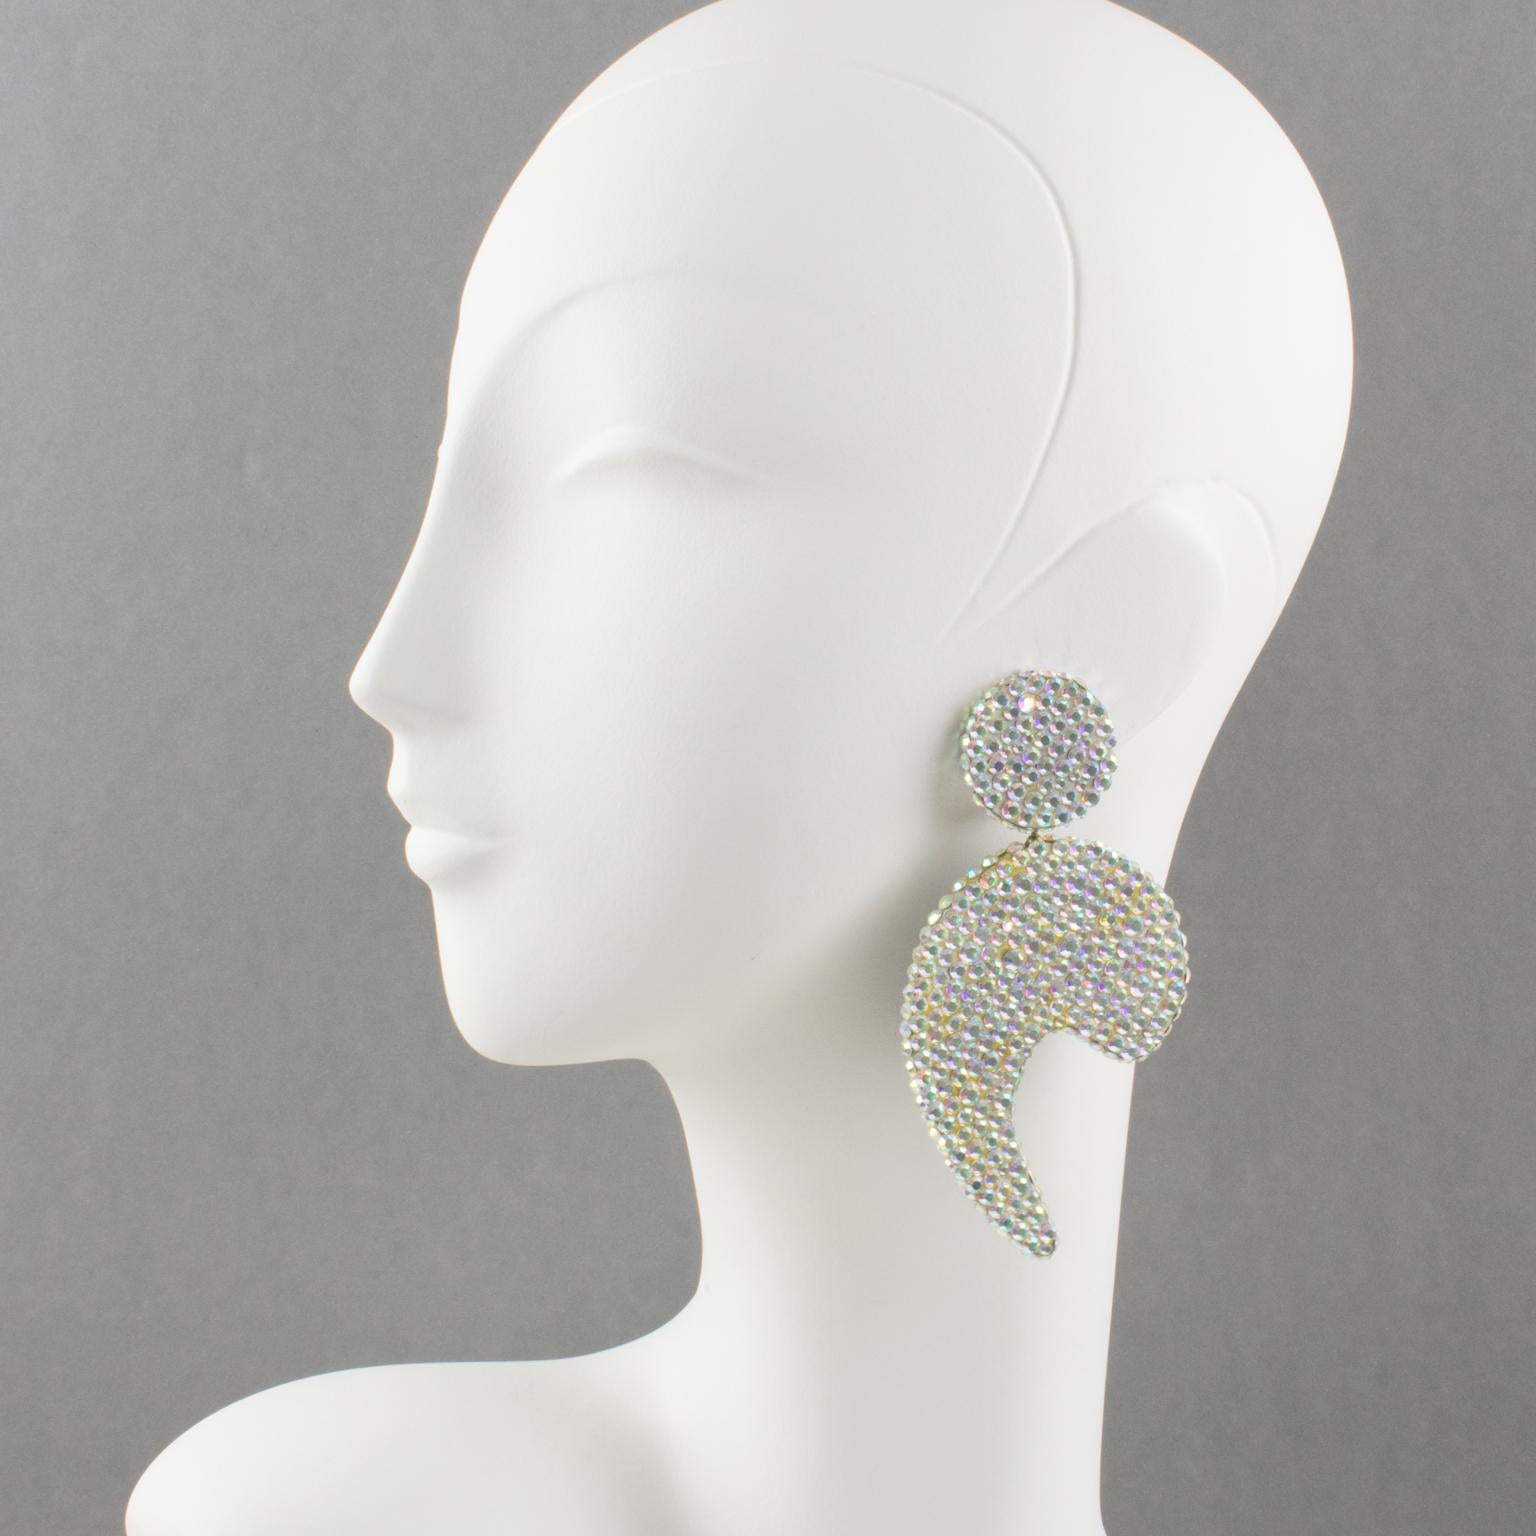 Incredible statement clip-on earrings designed by Richard Kerr in the 1980s. They are made up of his signature pave rhinestones. Featuring oversized dangling 